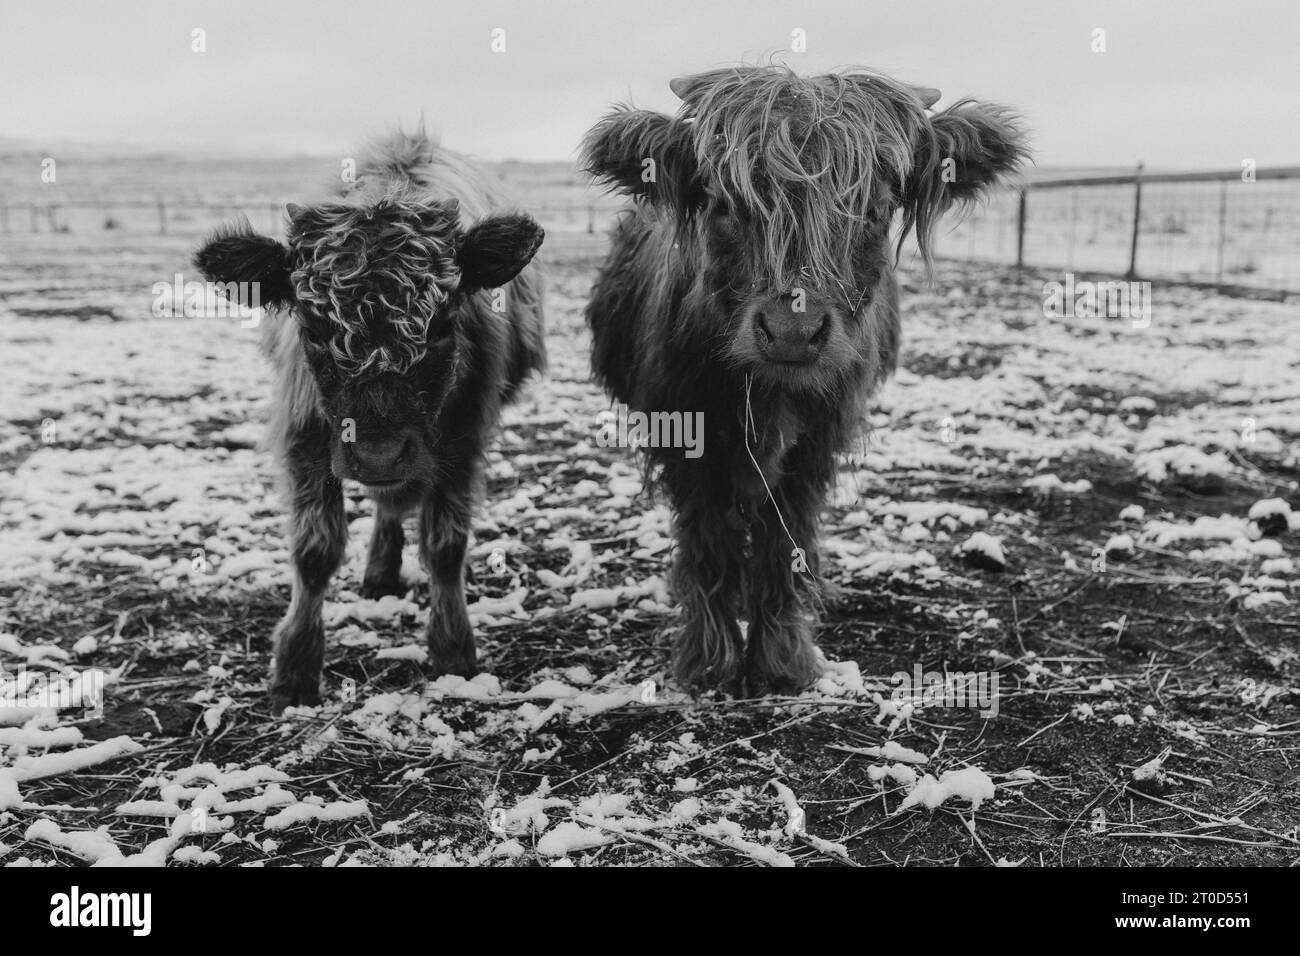 B&W image of two fluffy cows in snow. Stock Photo